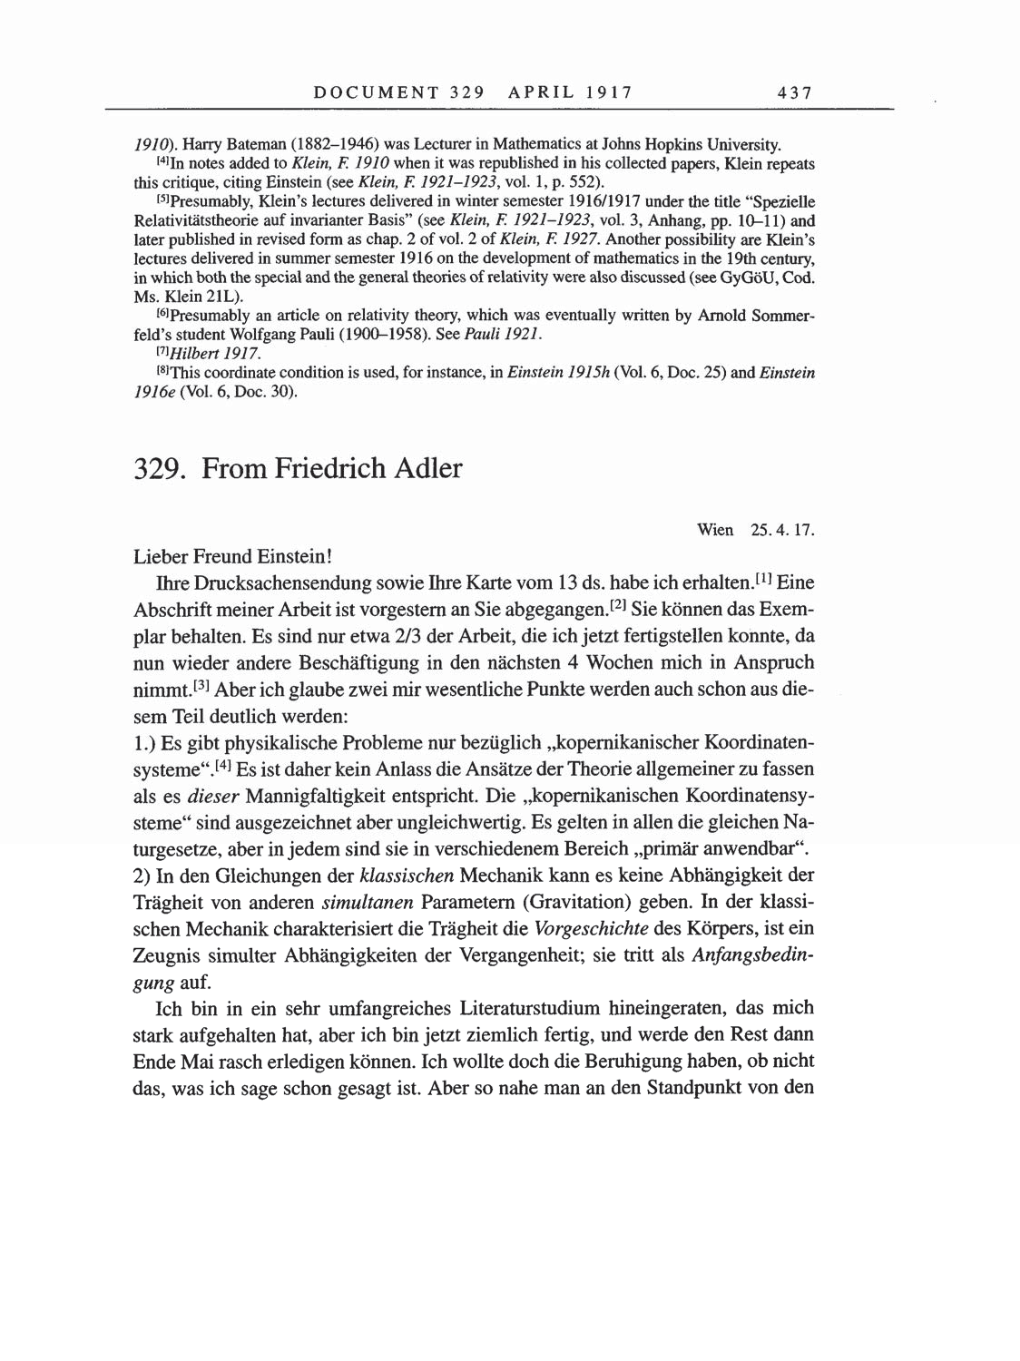 Volume 8, Part A: The Berlin Years: Correspondence 1914-1917 page 437